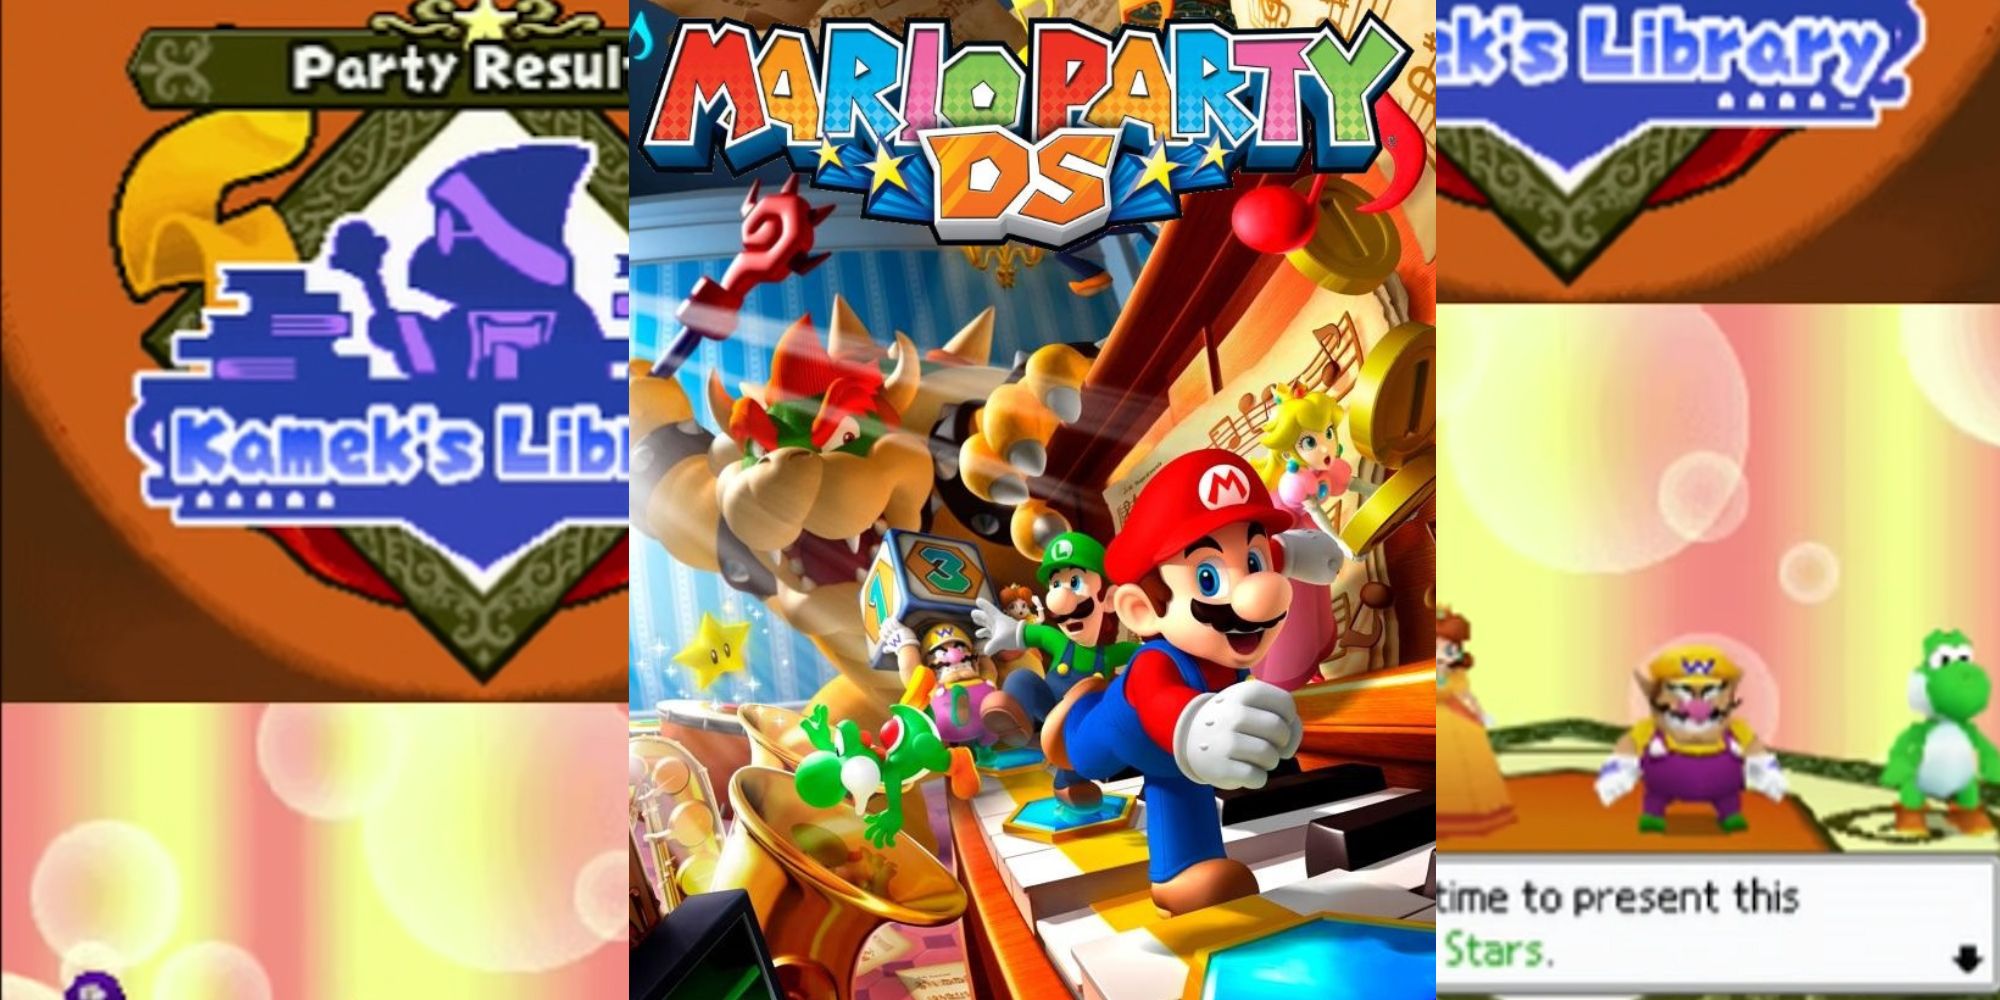 Mario Party DS (2007) kamek's library results of the party